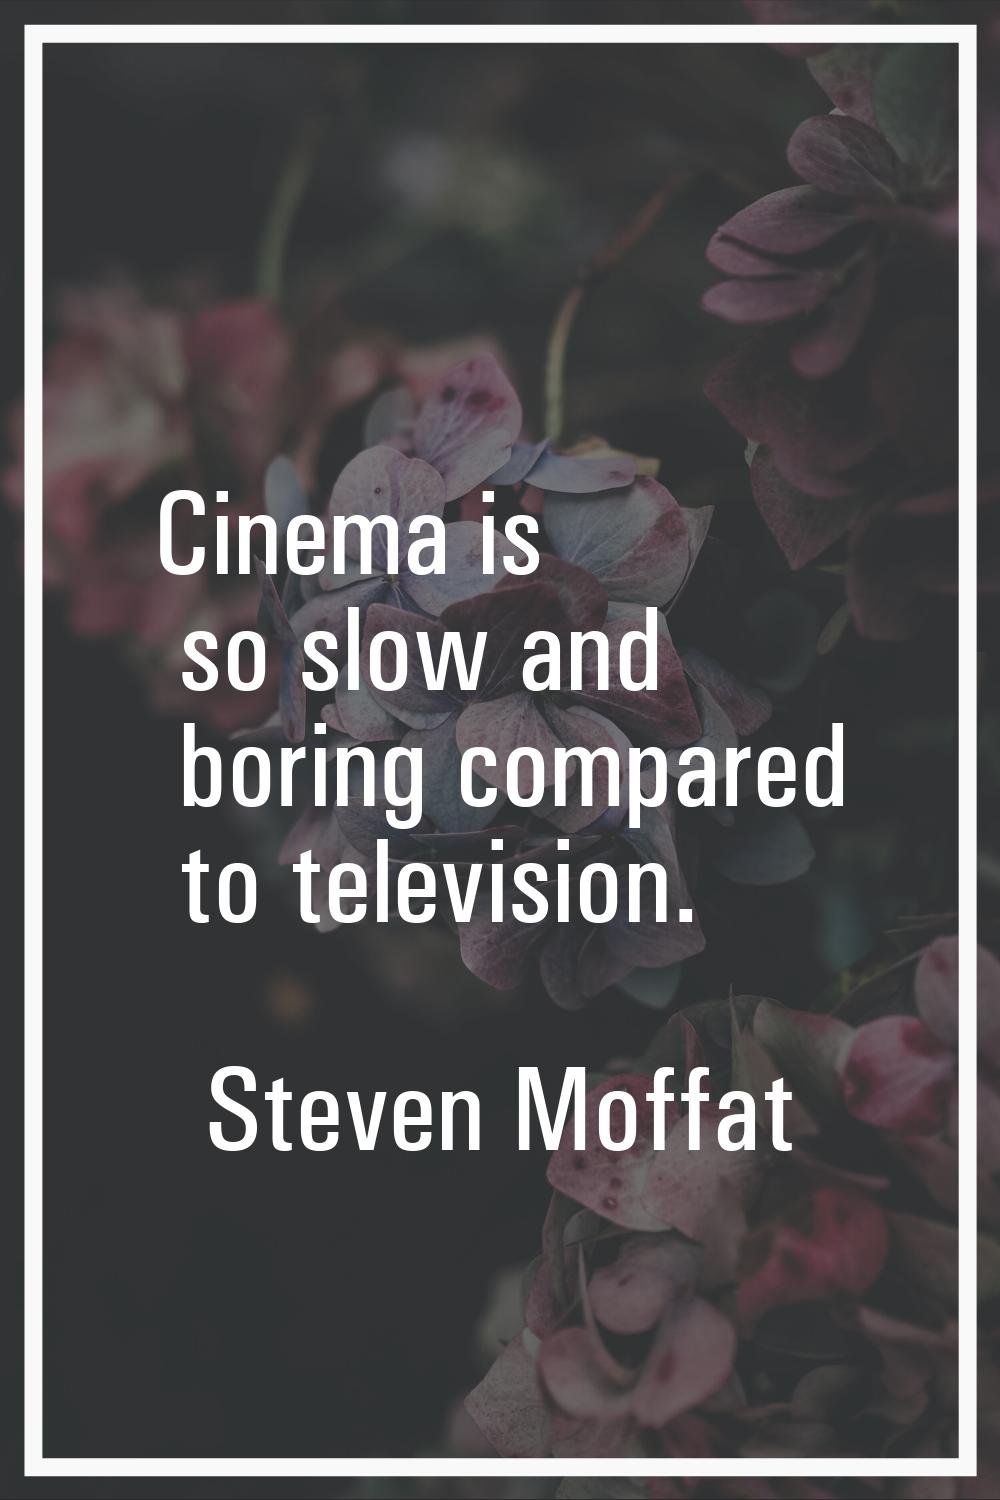 Cinema is so slow and boring compared to television.